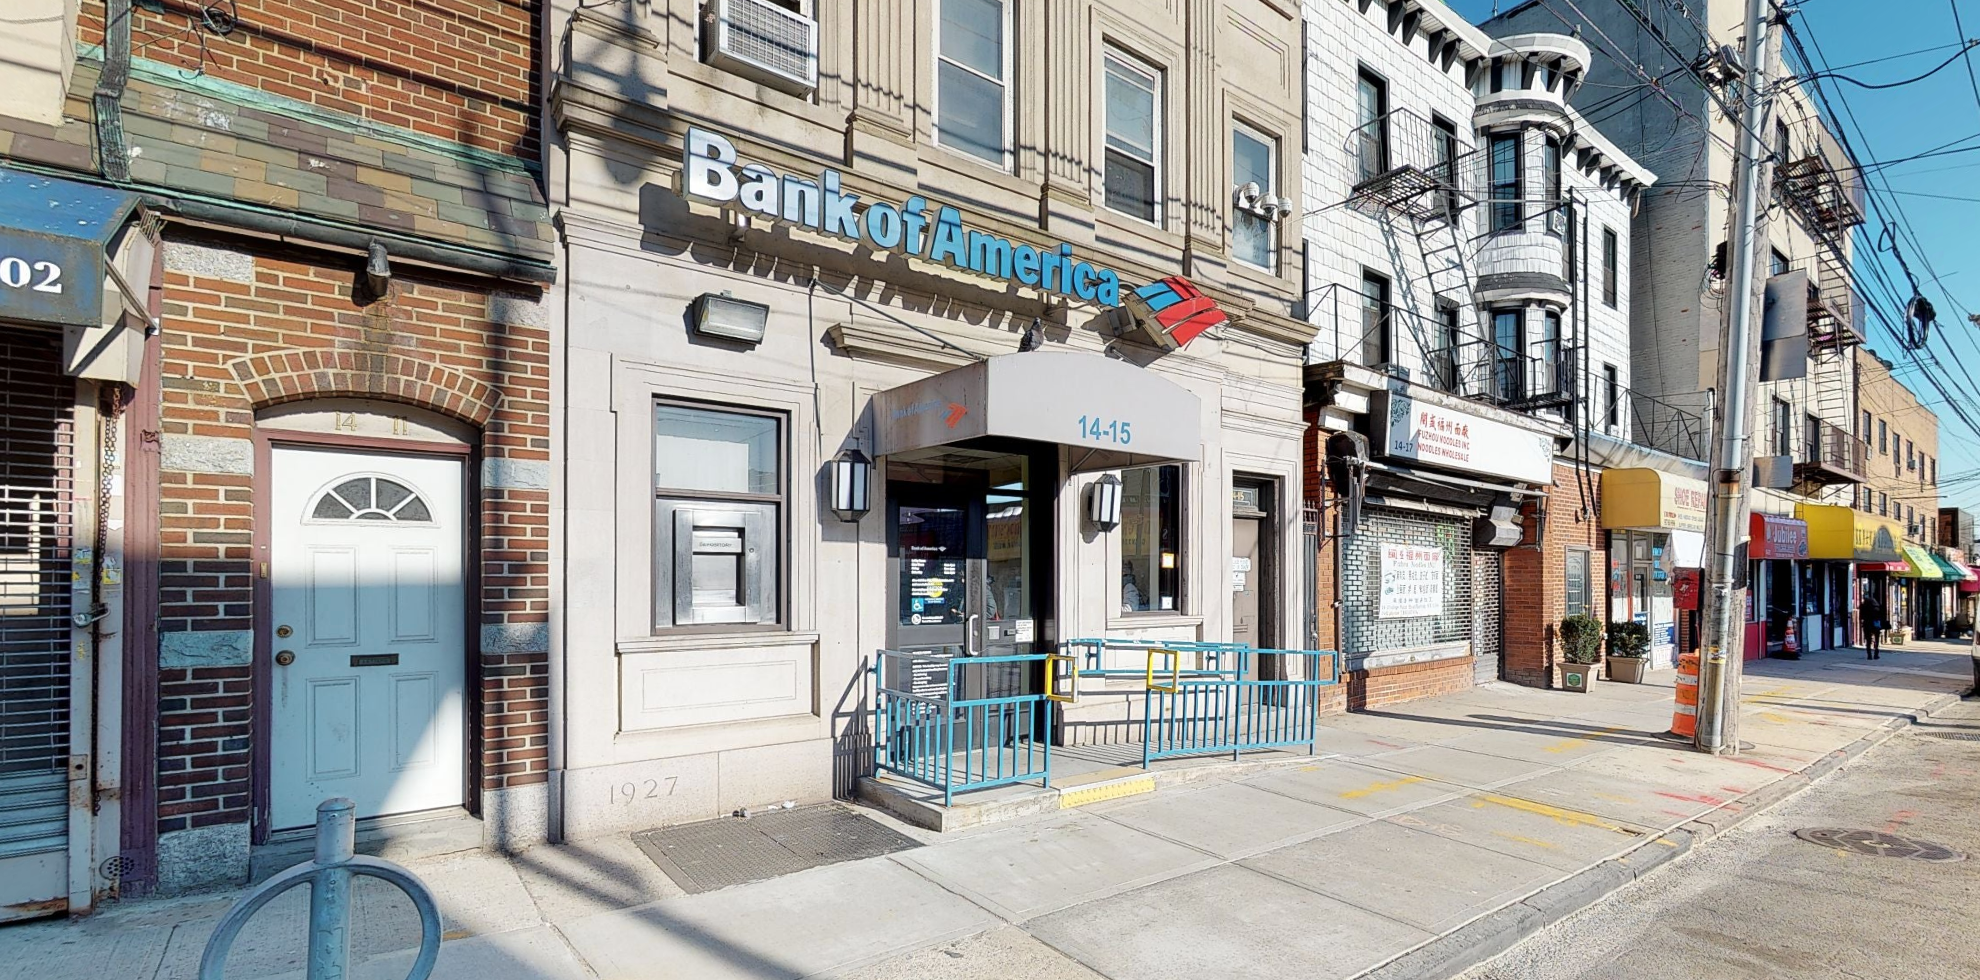 Bank of America financial center with walk-up ATM | 1415 College Point Blvd, College Point, NY 11356